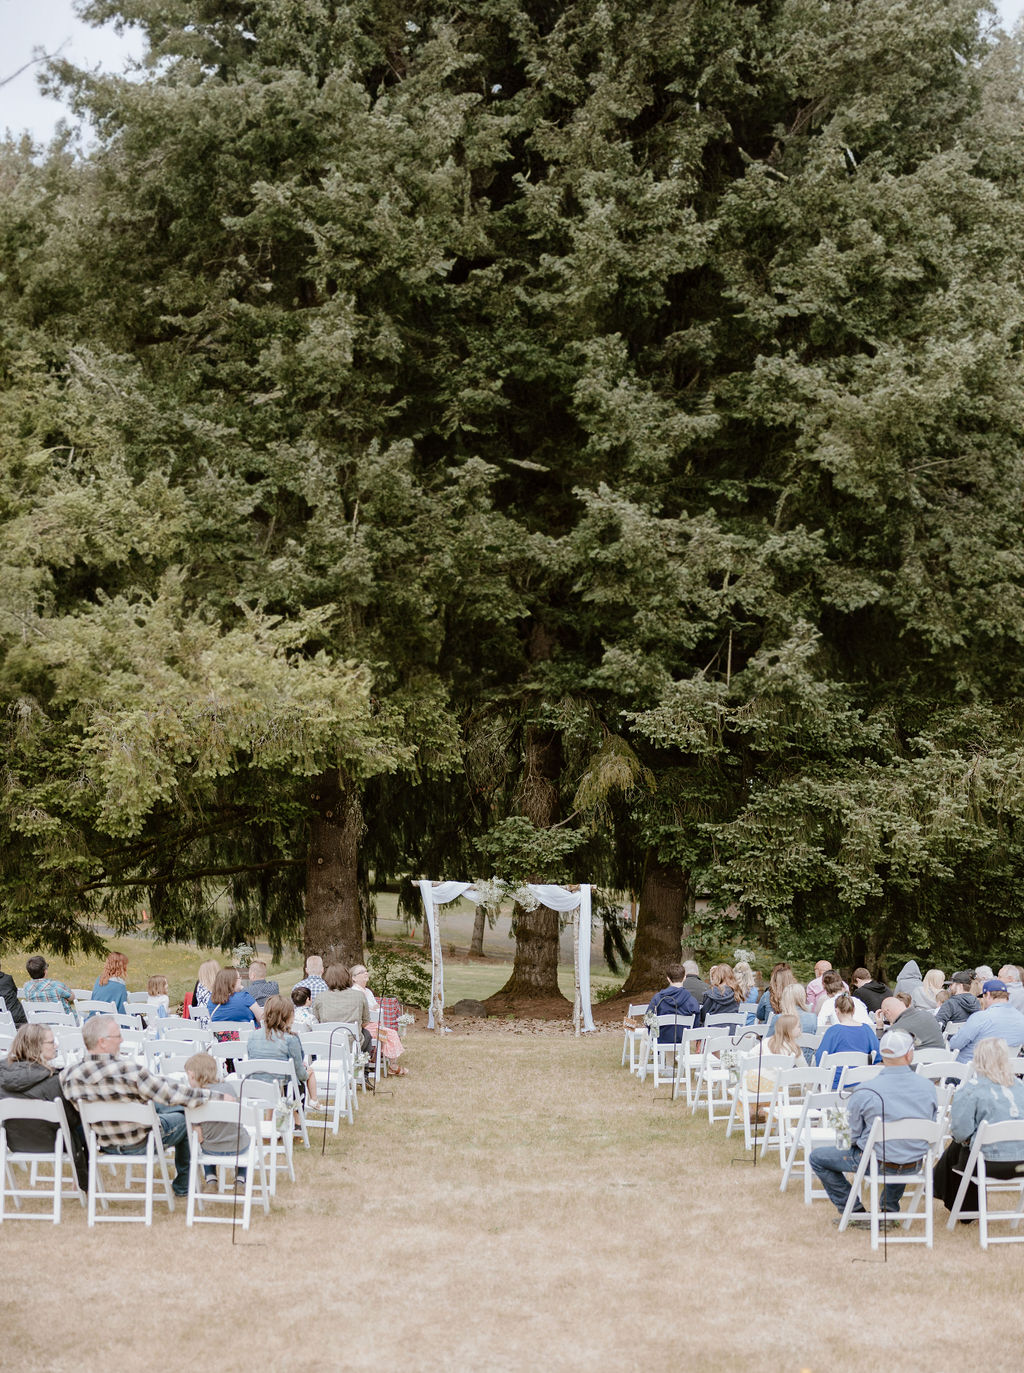 Outdoor wedding ceremony setup with rows of white chairs and a rustic arch.